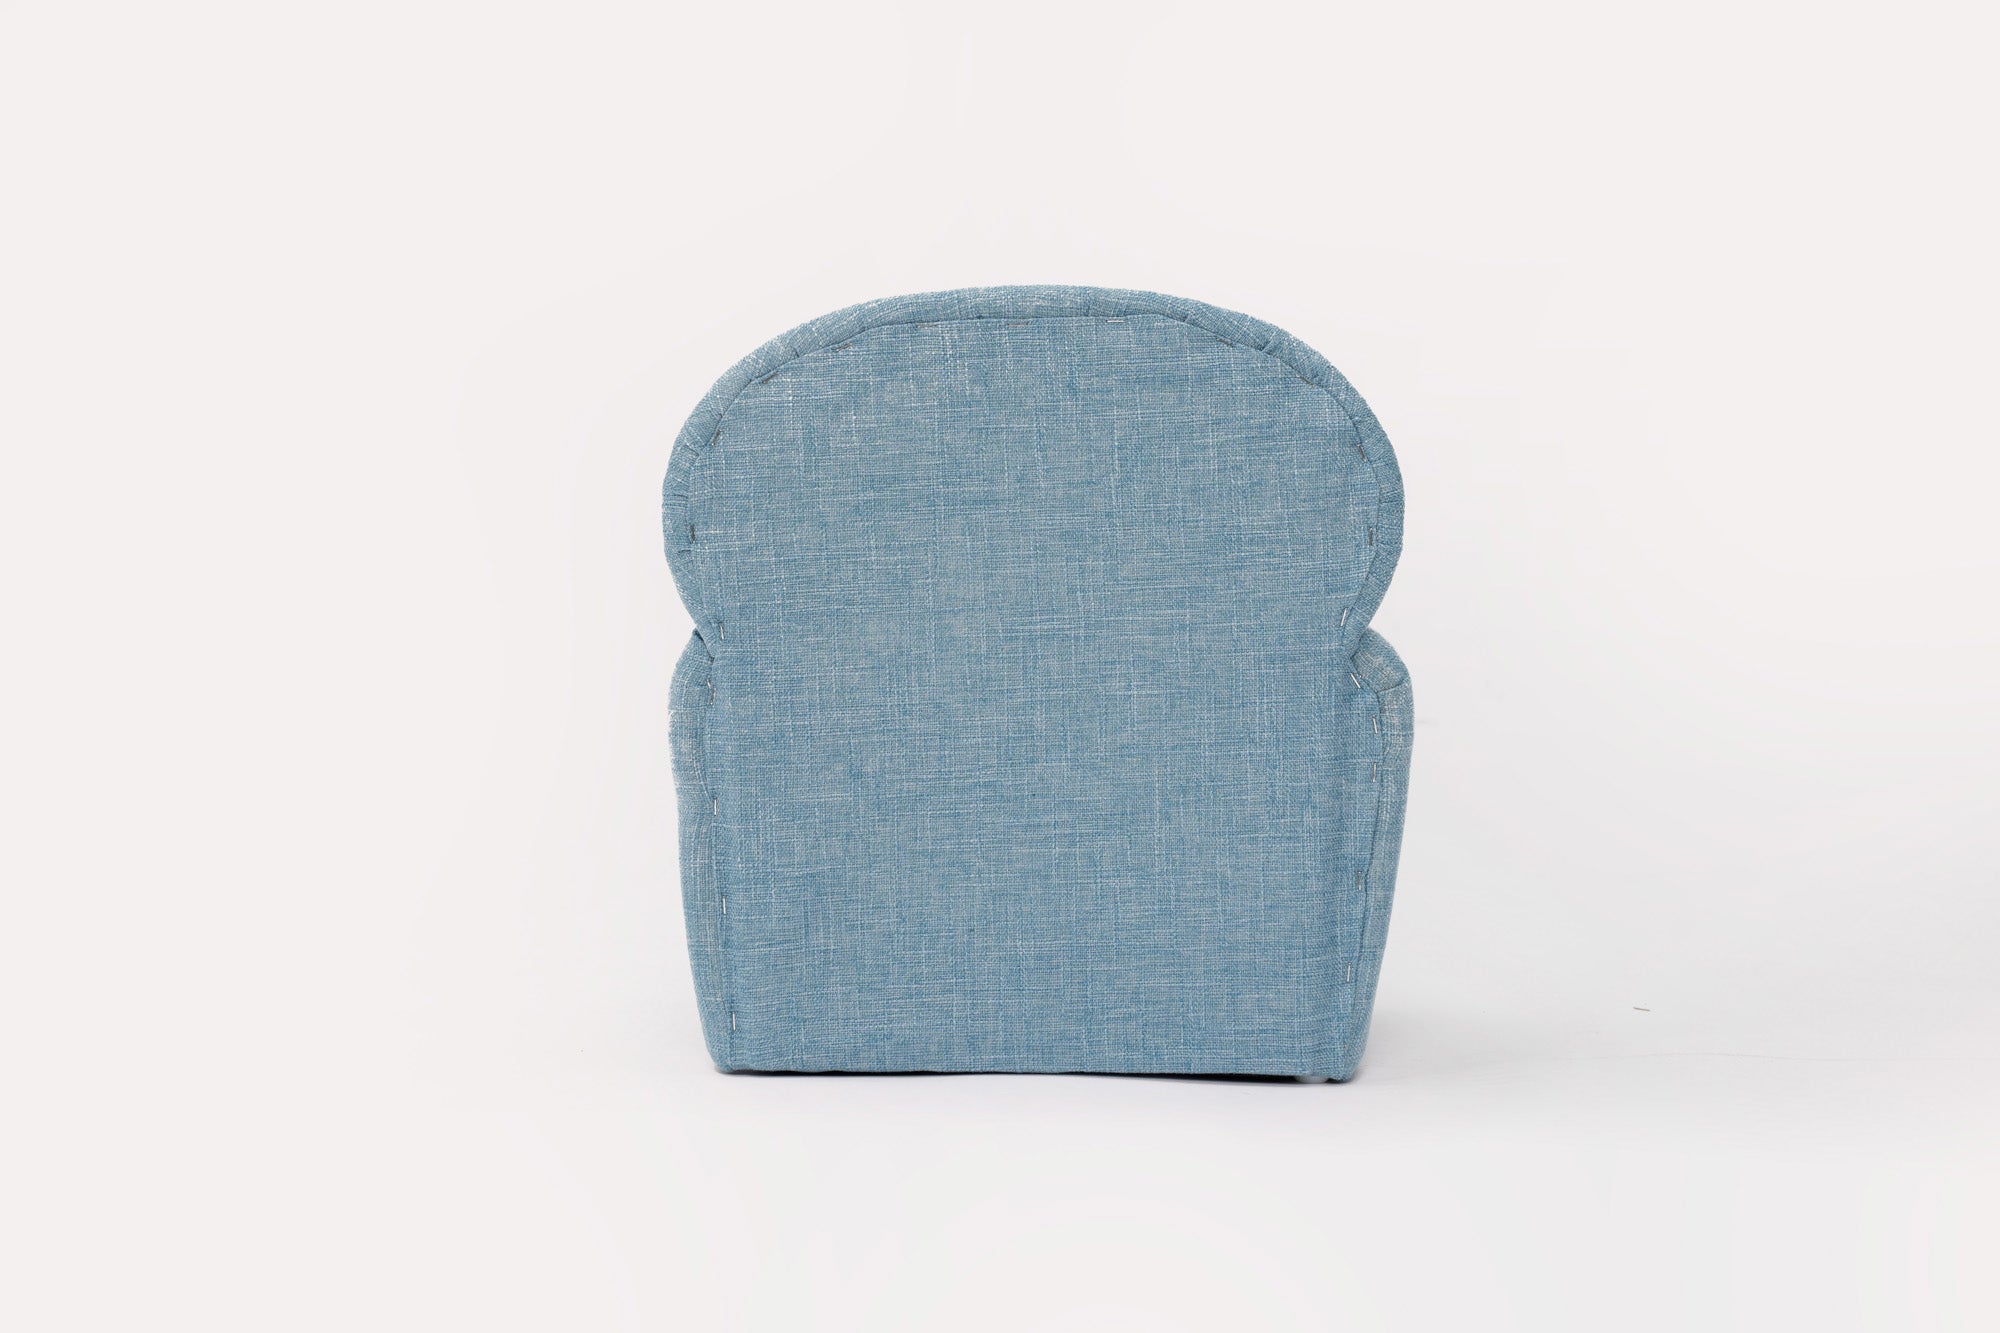 Kate Blue Fabric Mini Sofa with Rivet Newborn Props for Photography